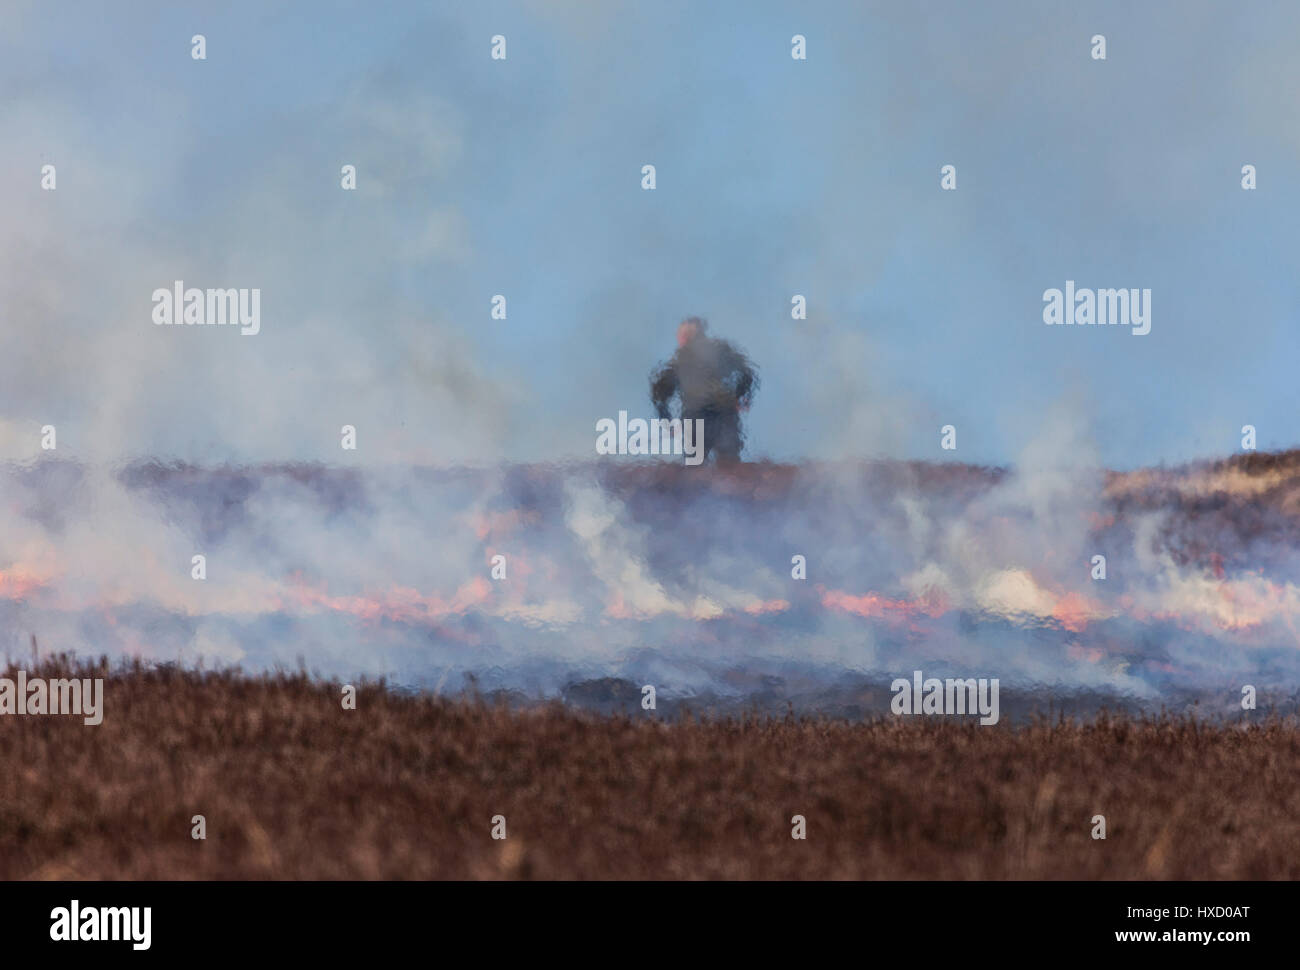 County Durham UK. Monday 27th March. UK Weather. Controlled heather burning of the grouse moors continues during the warm spring weather in the North Pennines. The heather is burned in a rotation in order to provide fresh young heather shoots for the Red Grouse to feed on. Credit: David Forster/Alamy Live News Stock Photo